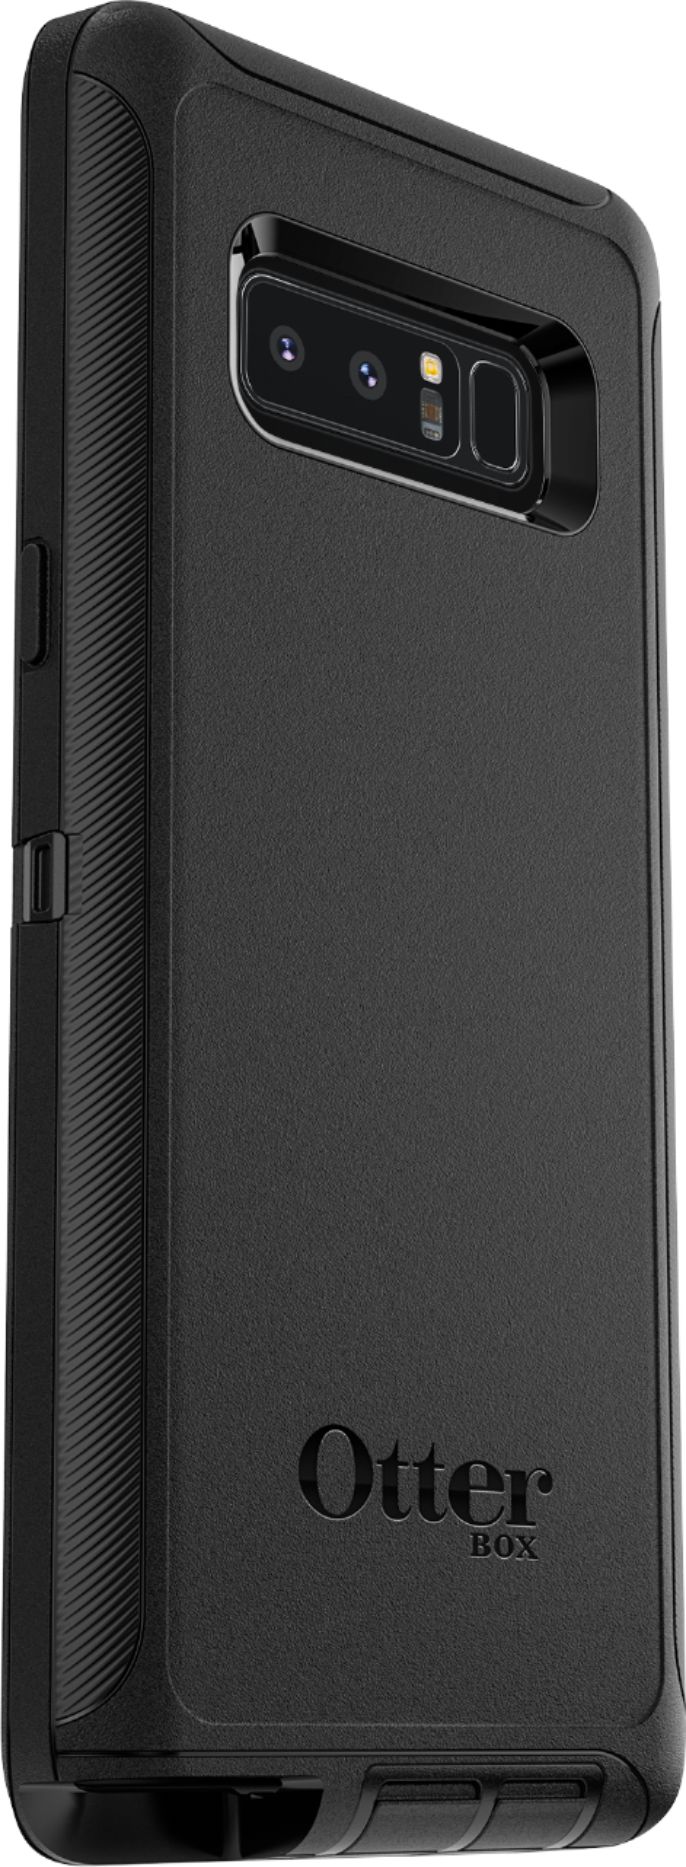 Best Buy: OtterBox Defender Series Case for Samsung Galaxy Note8 